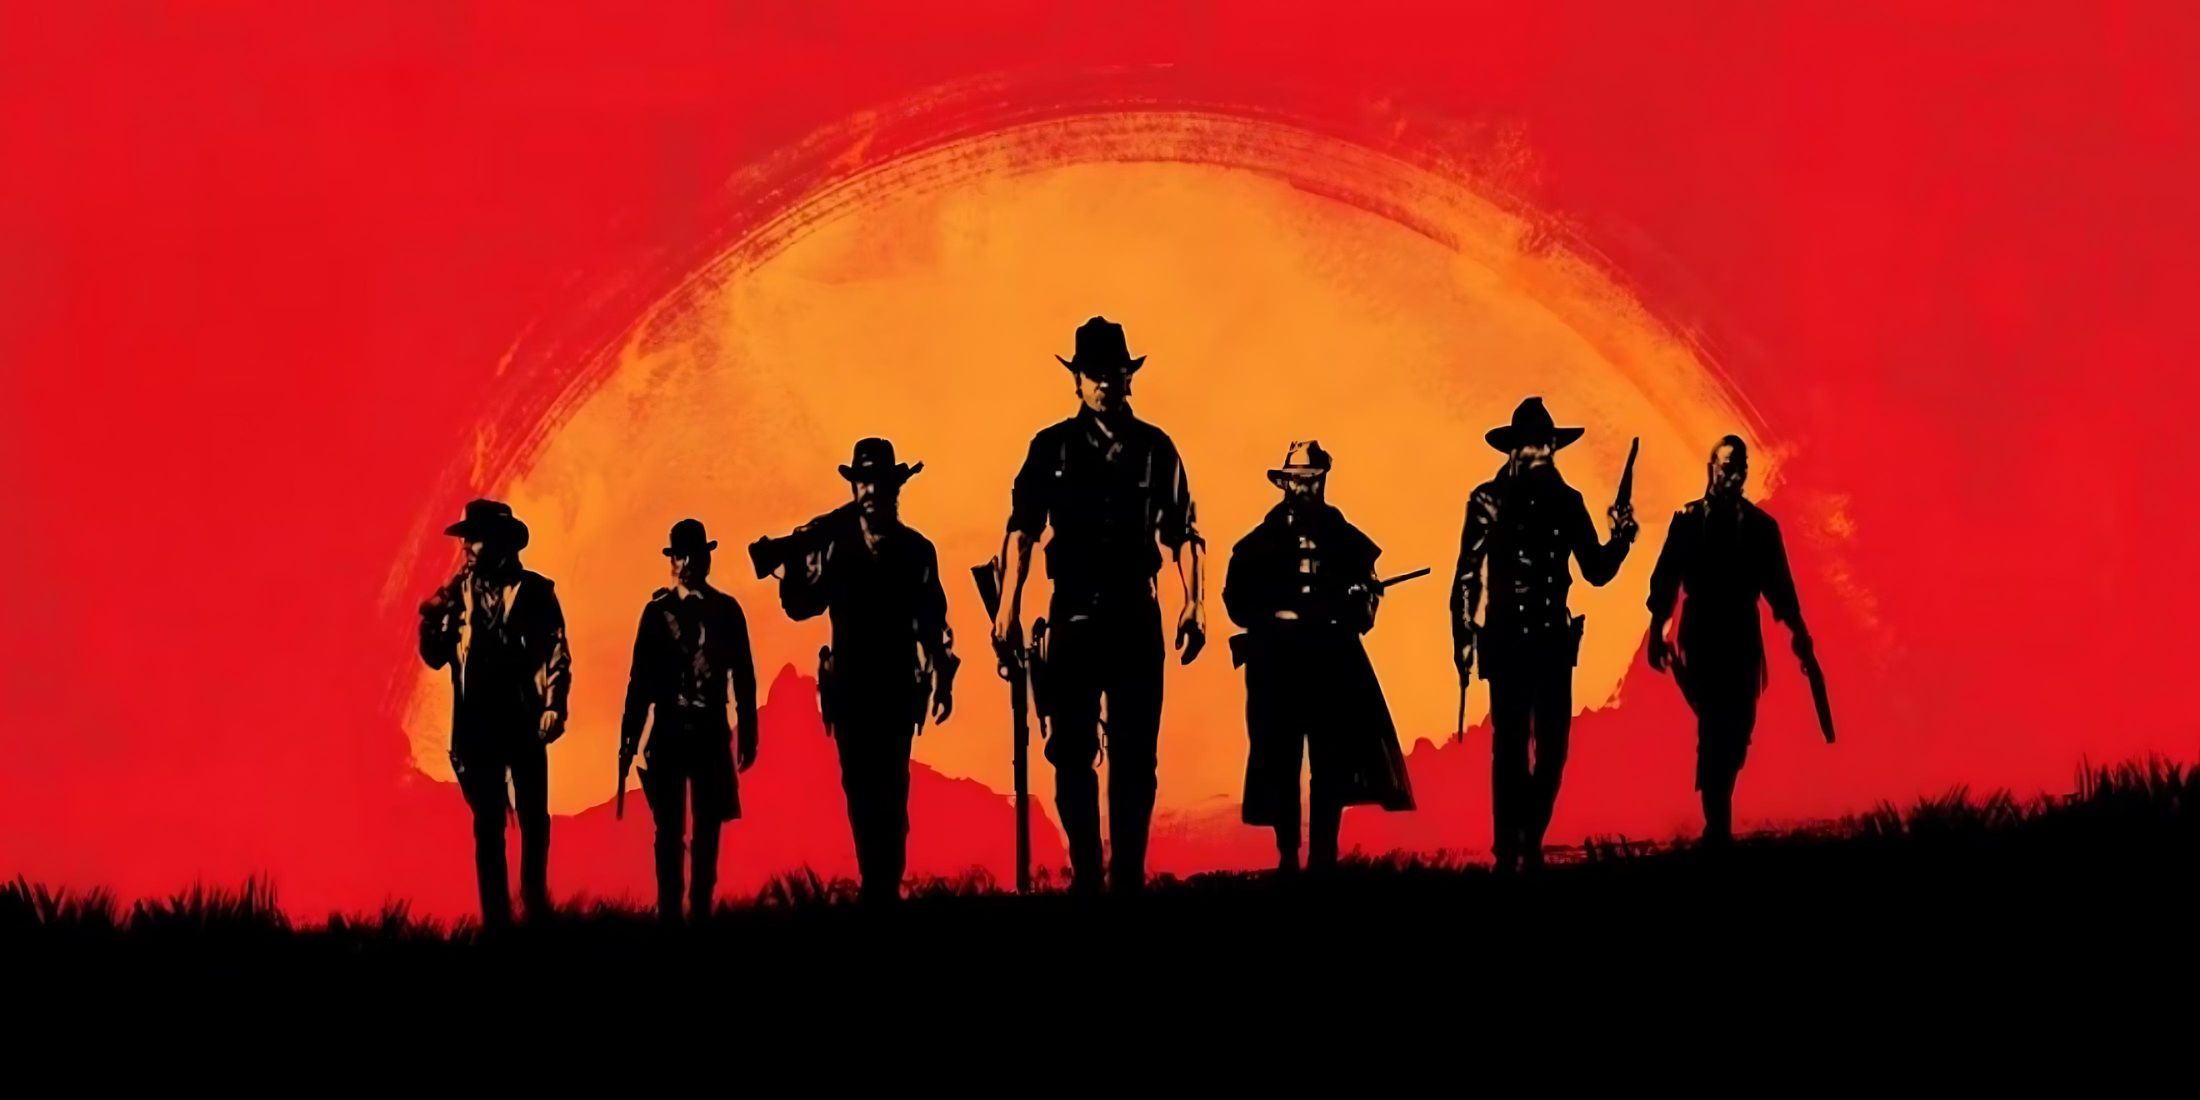 A cover image for Red Dead Redemption 2, showing multiple character silhouettes in the distance